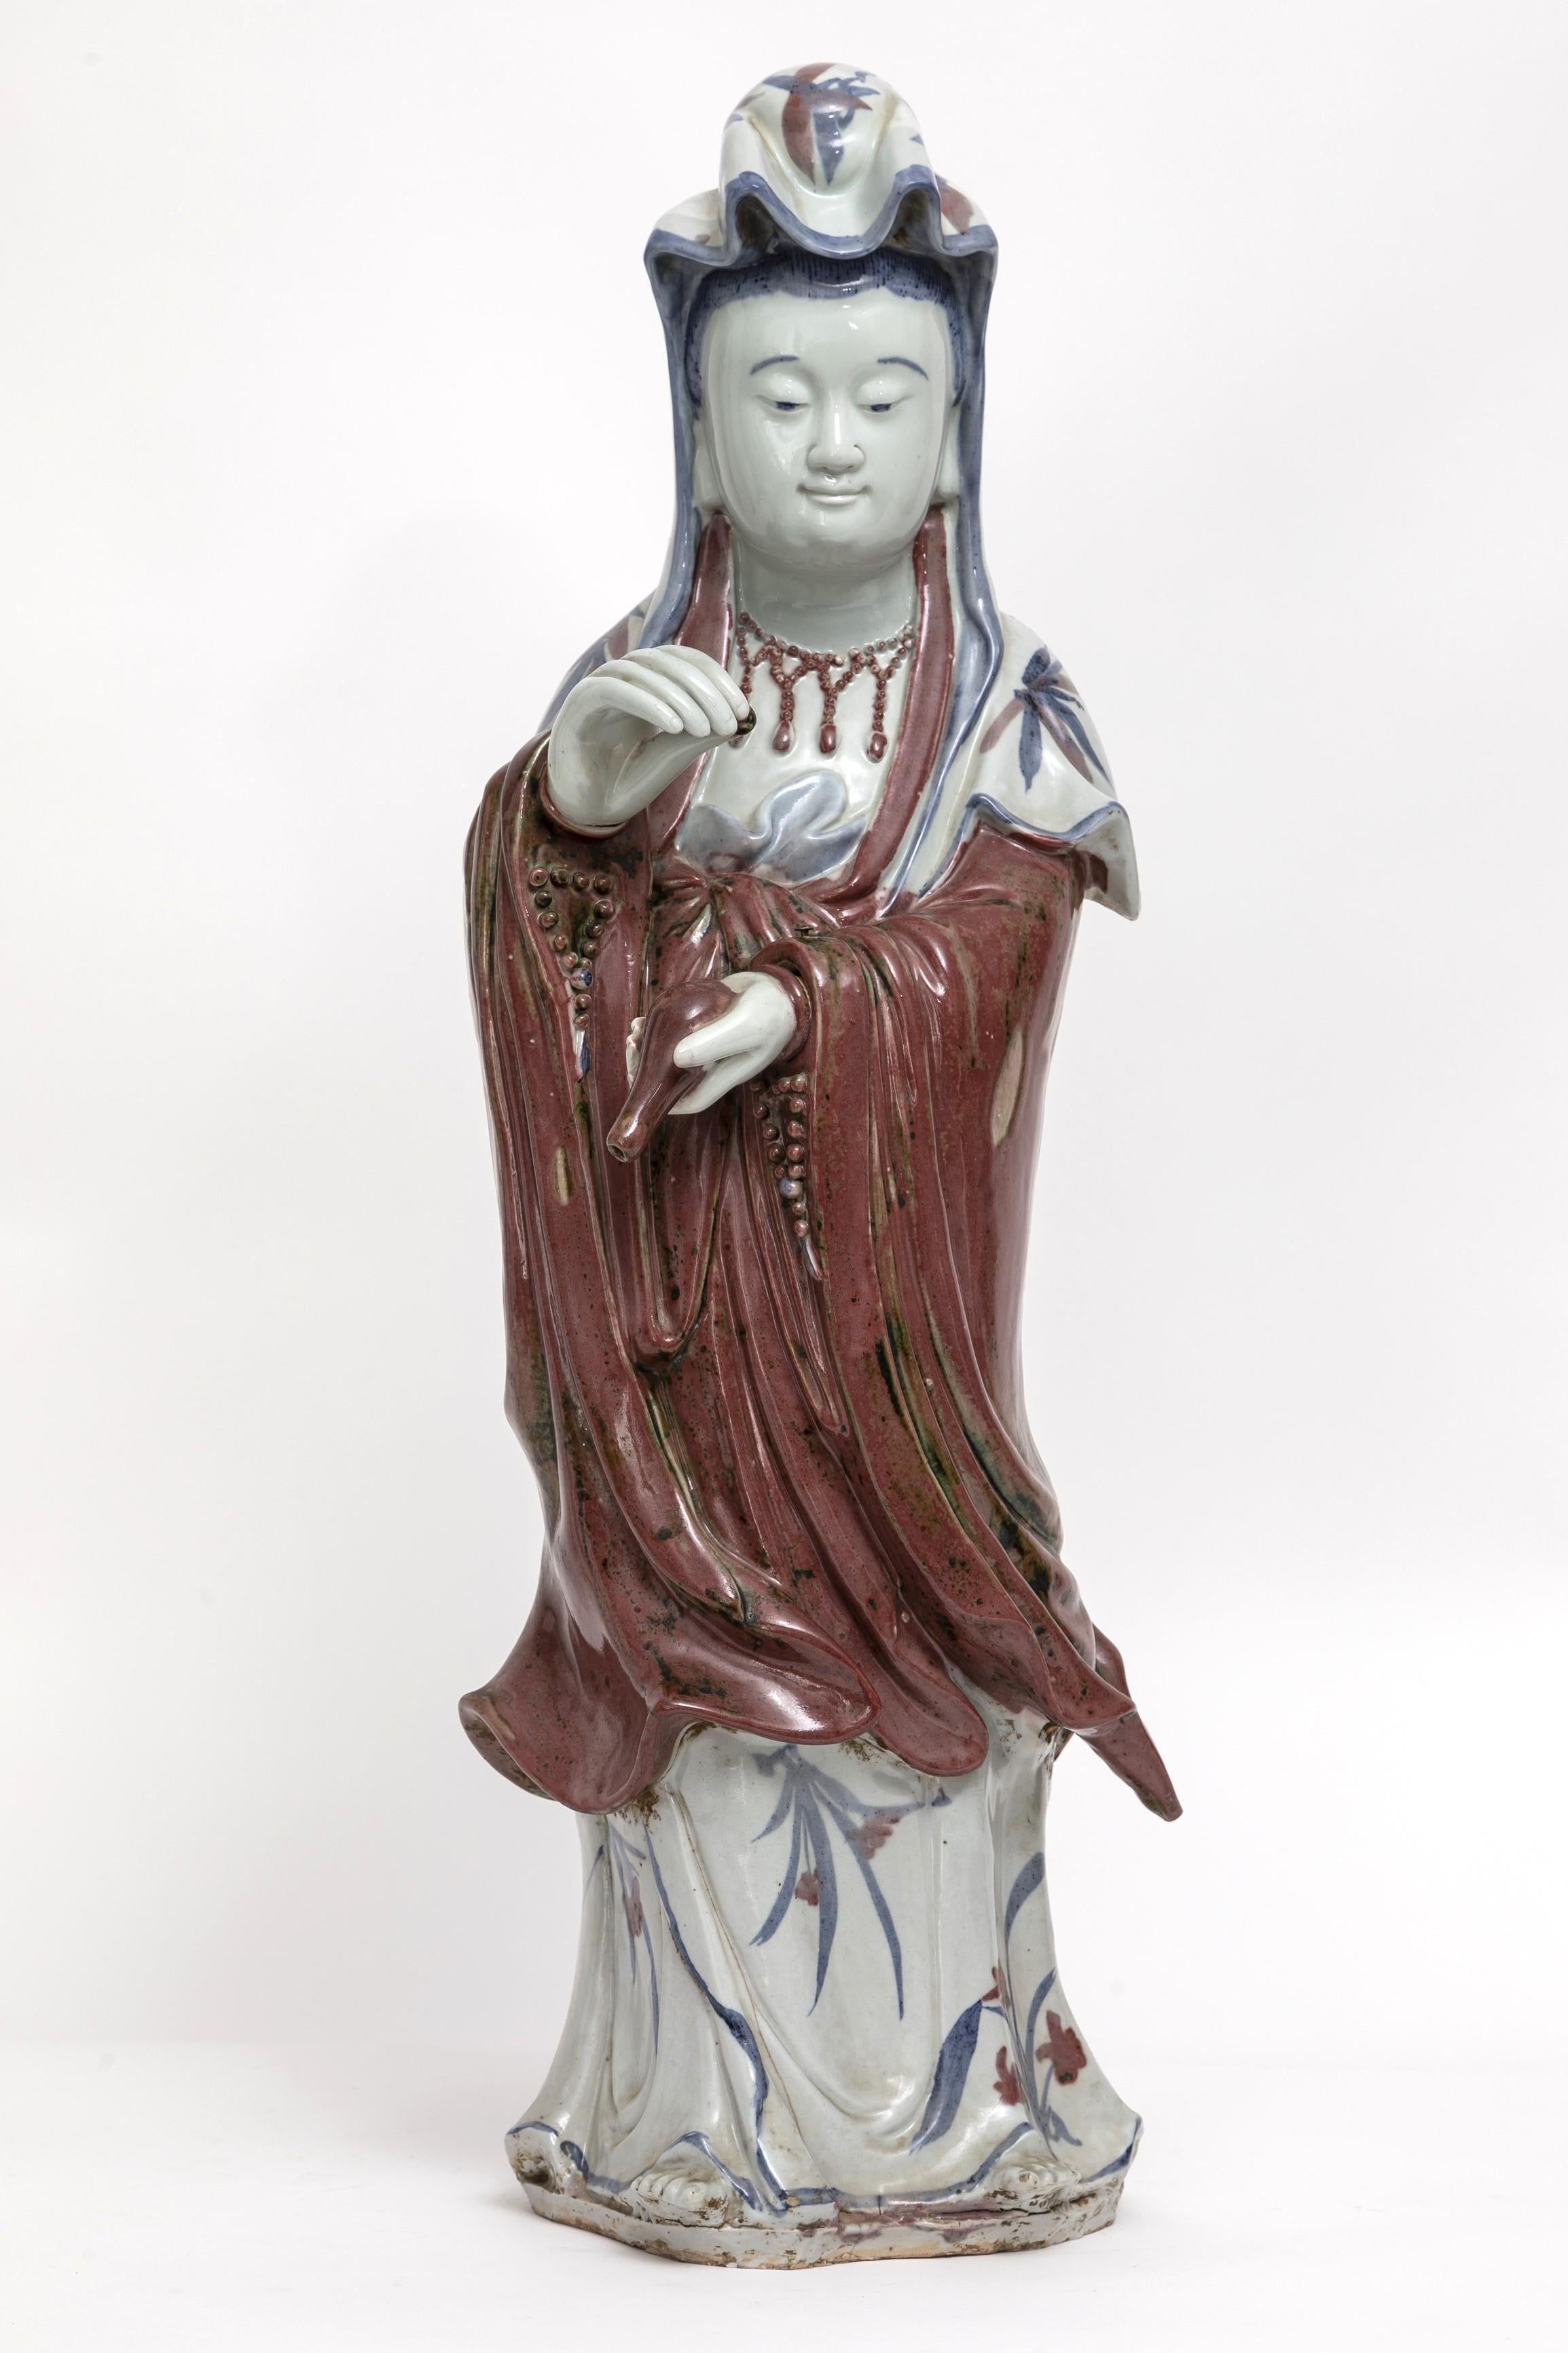 Introducing a Magnificent Japanese Porcelain Figure of a Guanyin - A Monumental Expression of Serenity and Grace.

Behold this majestic depiction of Guanyin, rendered in porcelain with remarkable skill and artistry. Standing almost waist-height,